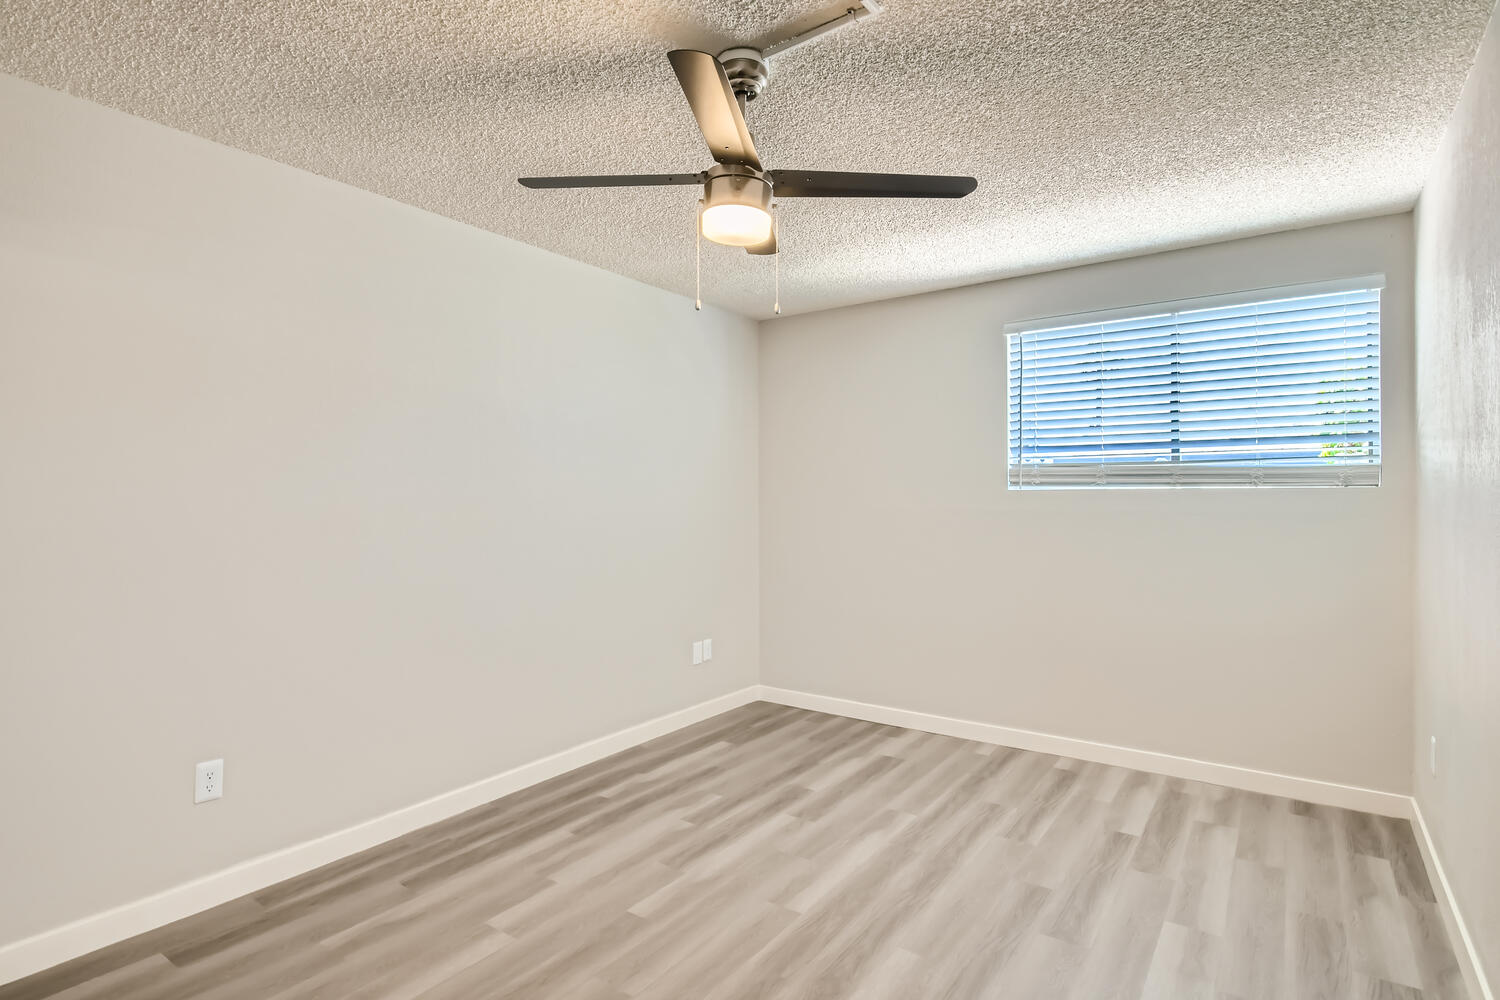 An apartment bedroom with wood-style flooring, a ceiling fan, and a window at Rise on McClintock.